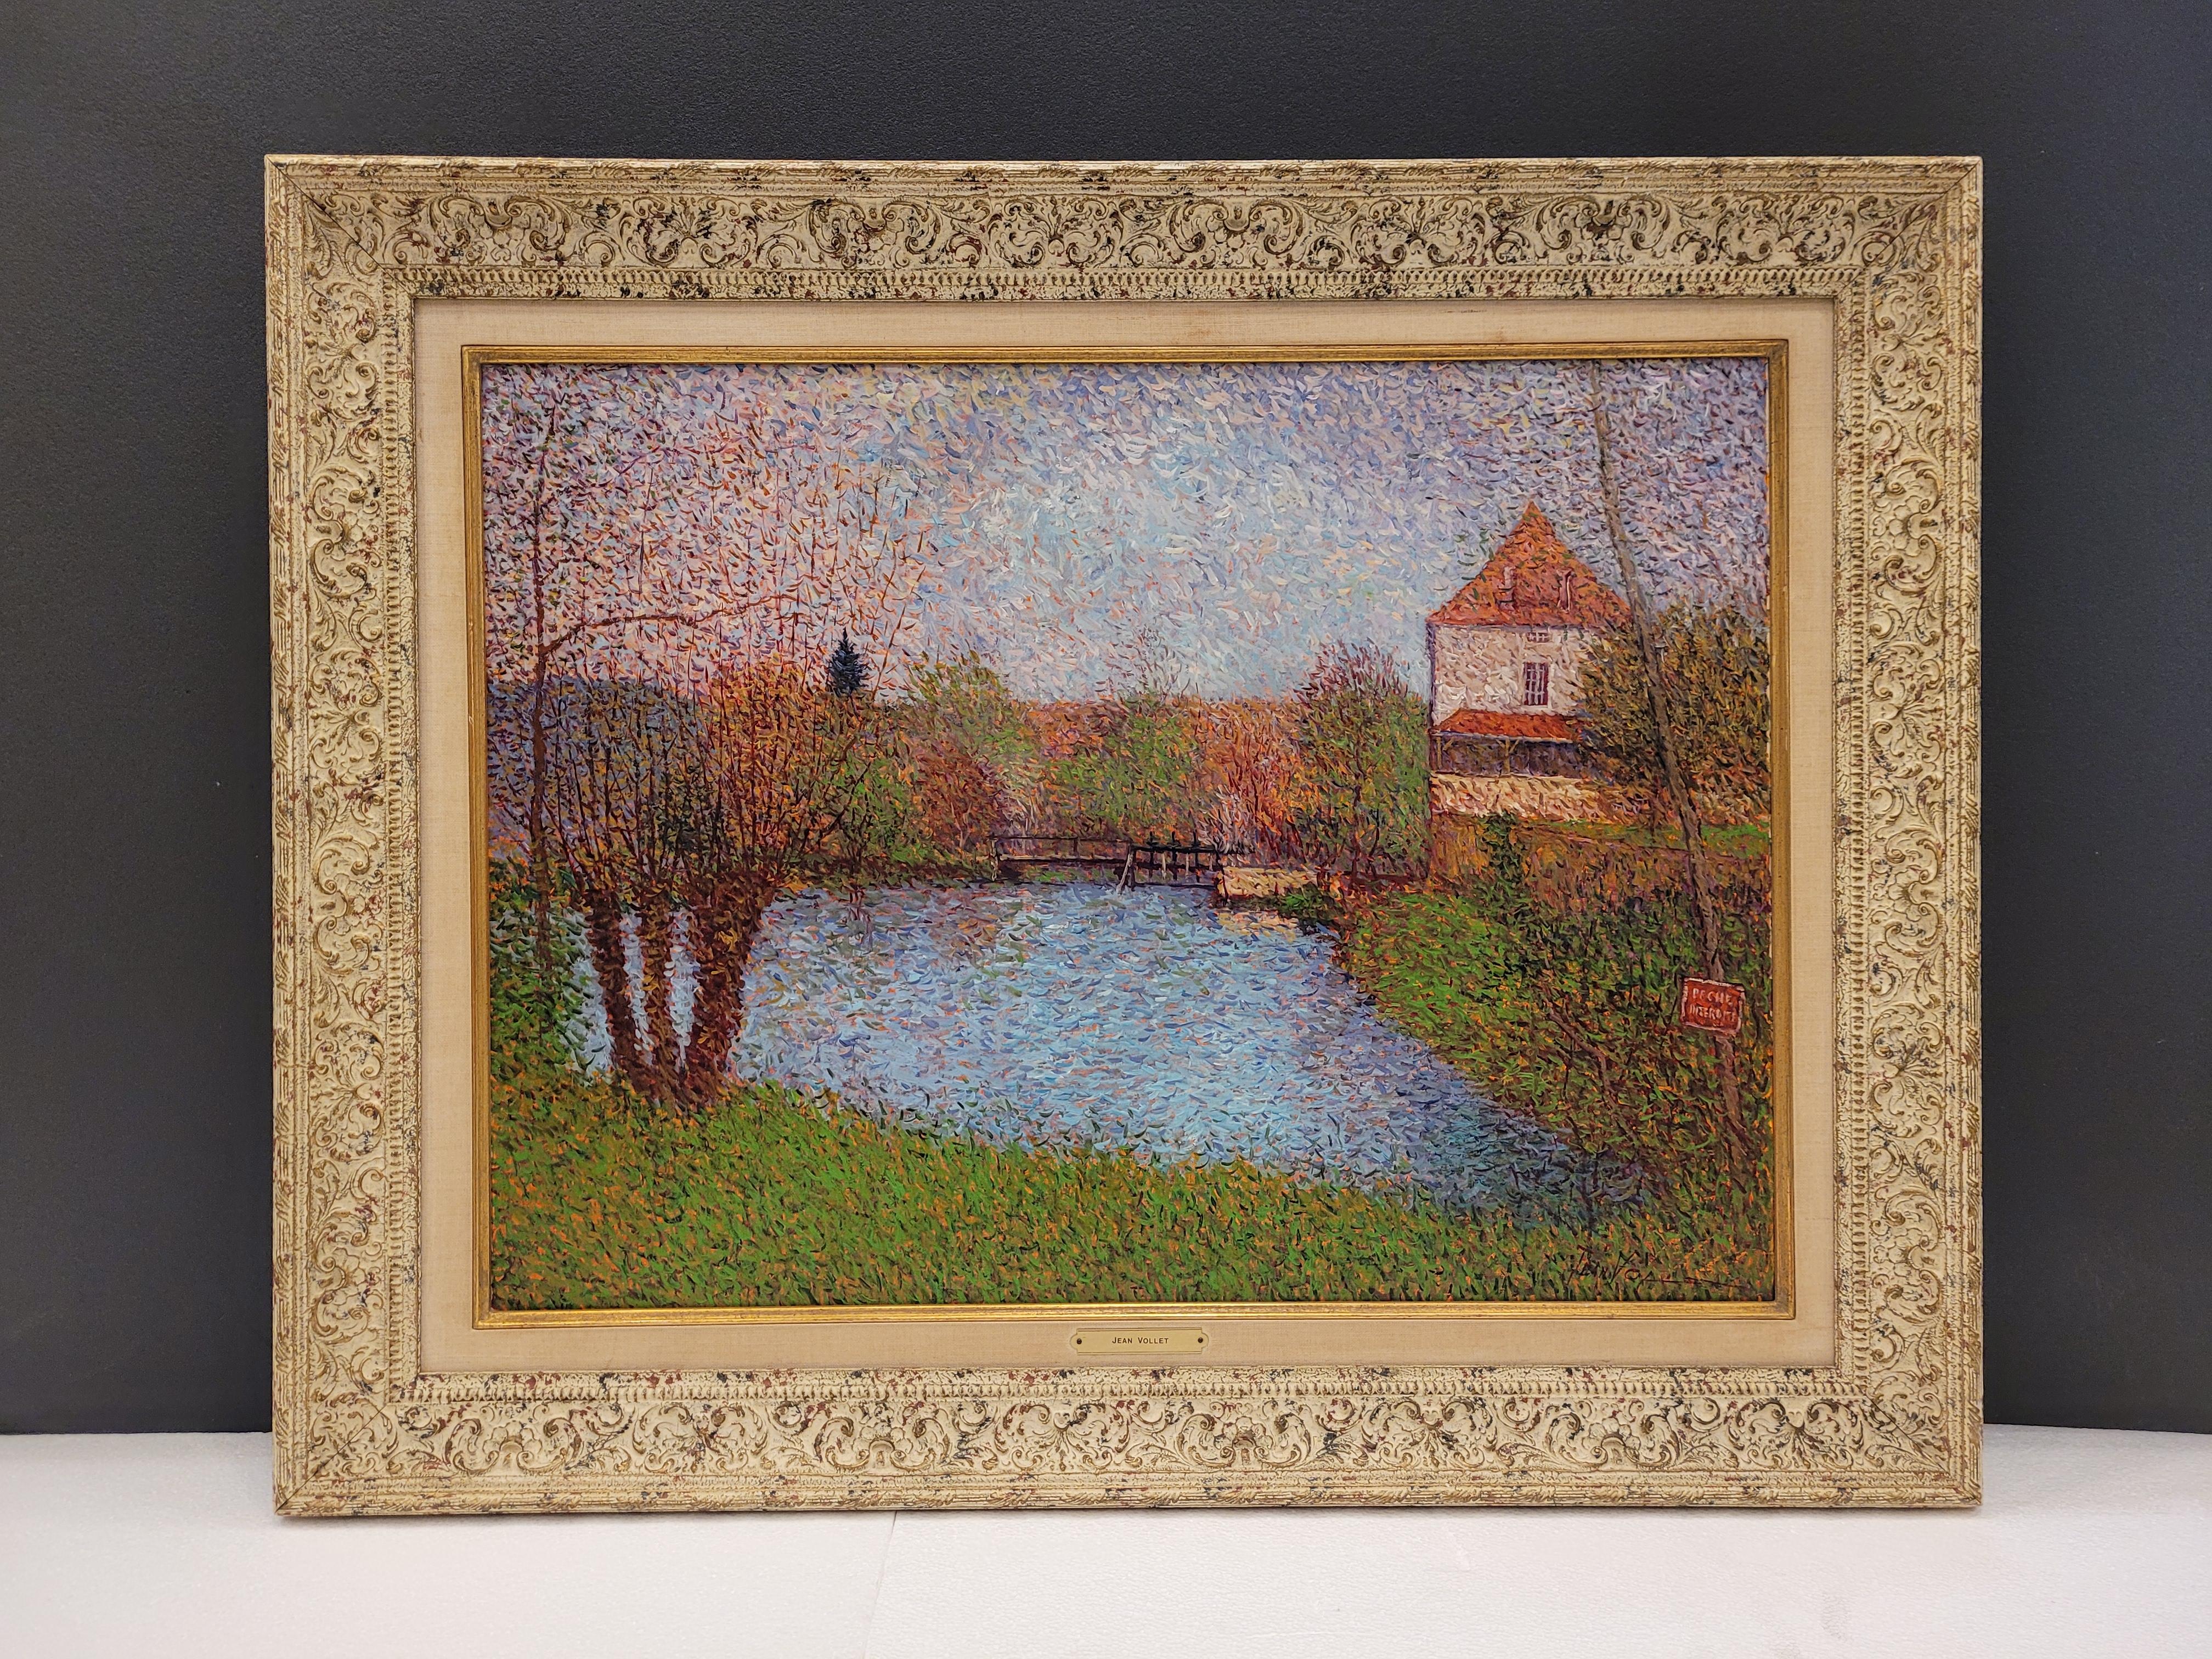 
Jean Vollet - Pointillist landscape of the Yonne River - Oil painting
This work of art was exhibited in New York in 1984 in an exhibition dedicated to pointillism

French Expressionist - Oil Painting on Canvas - Signed and Titled Unframed Size